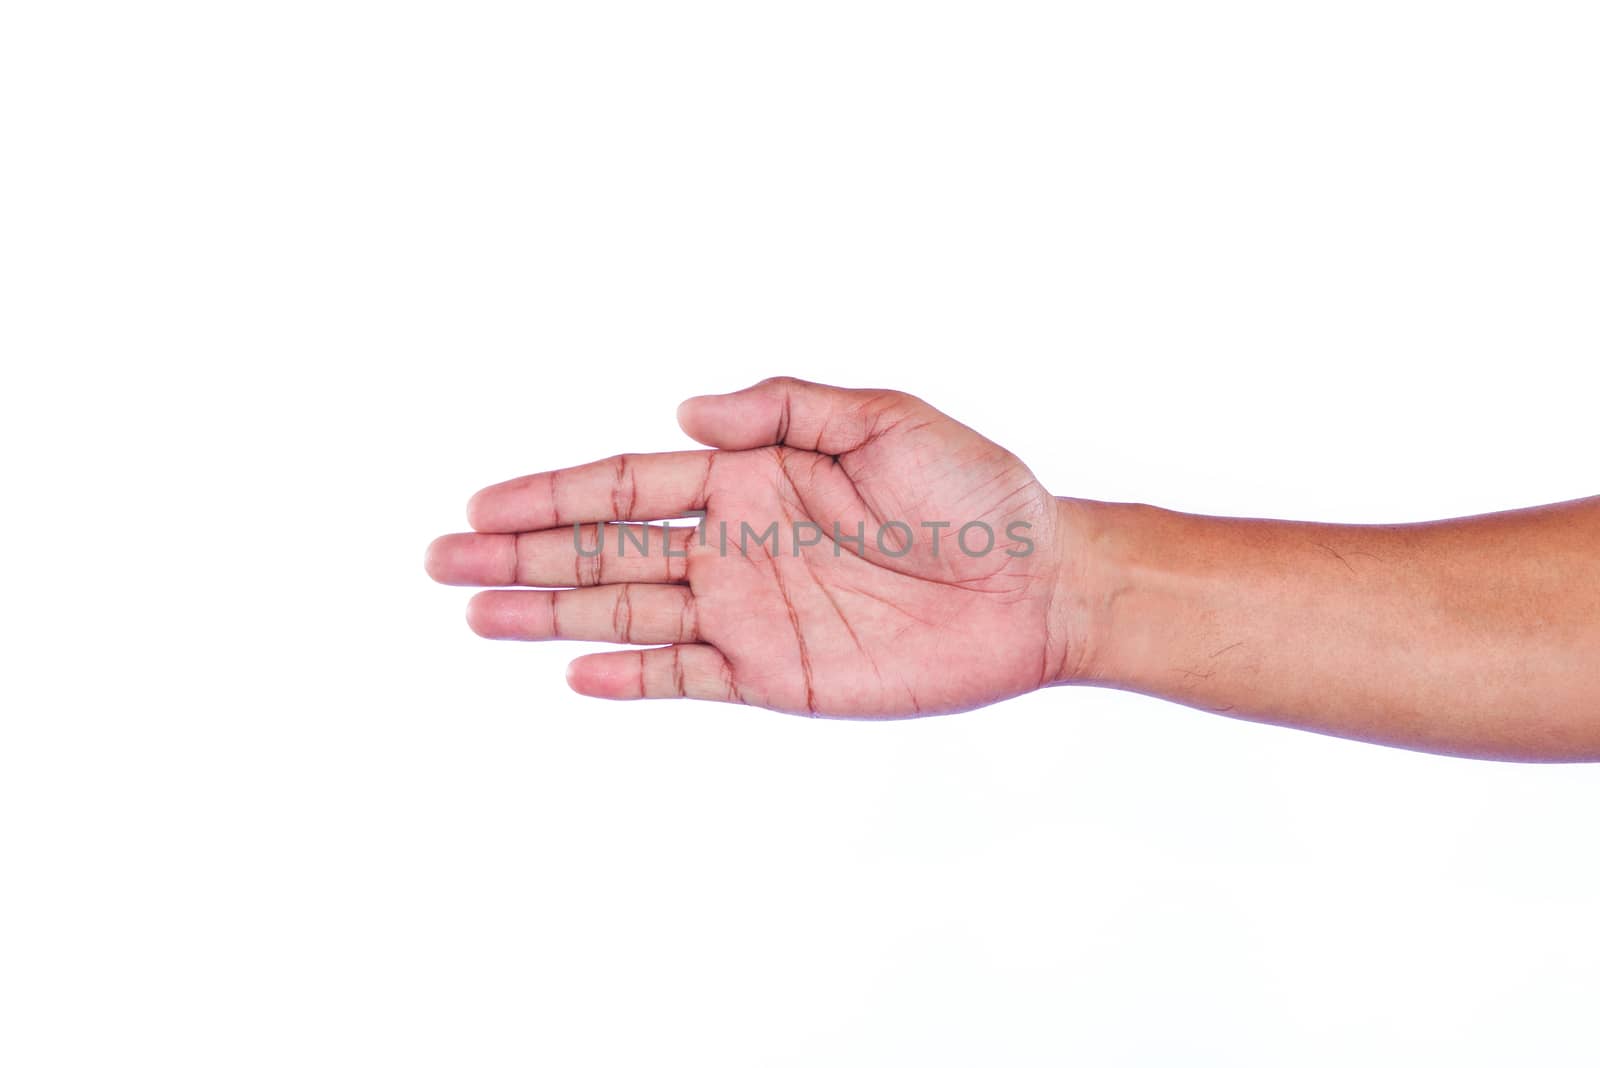 male hands about to shake hands, over white background by Yuri2012